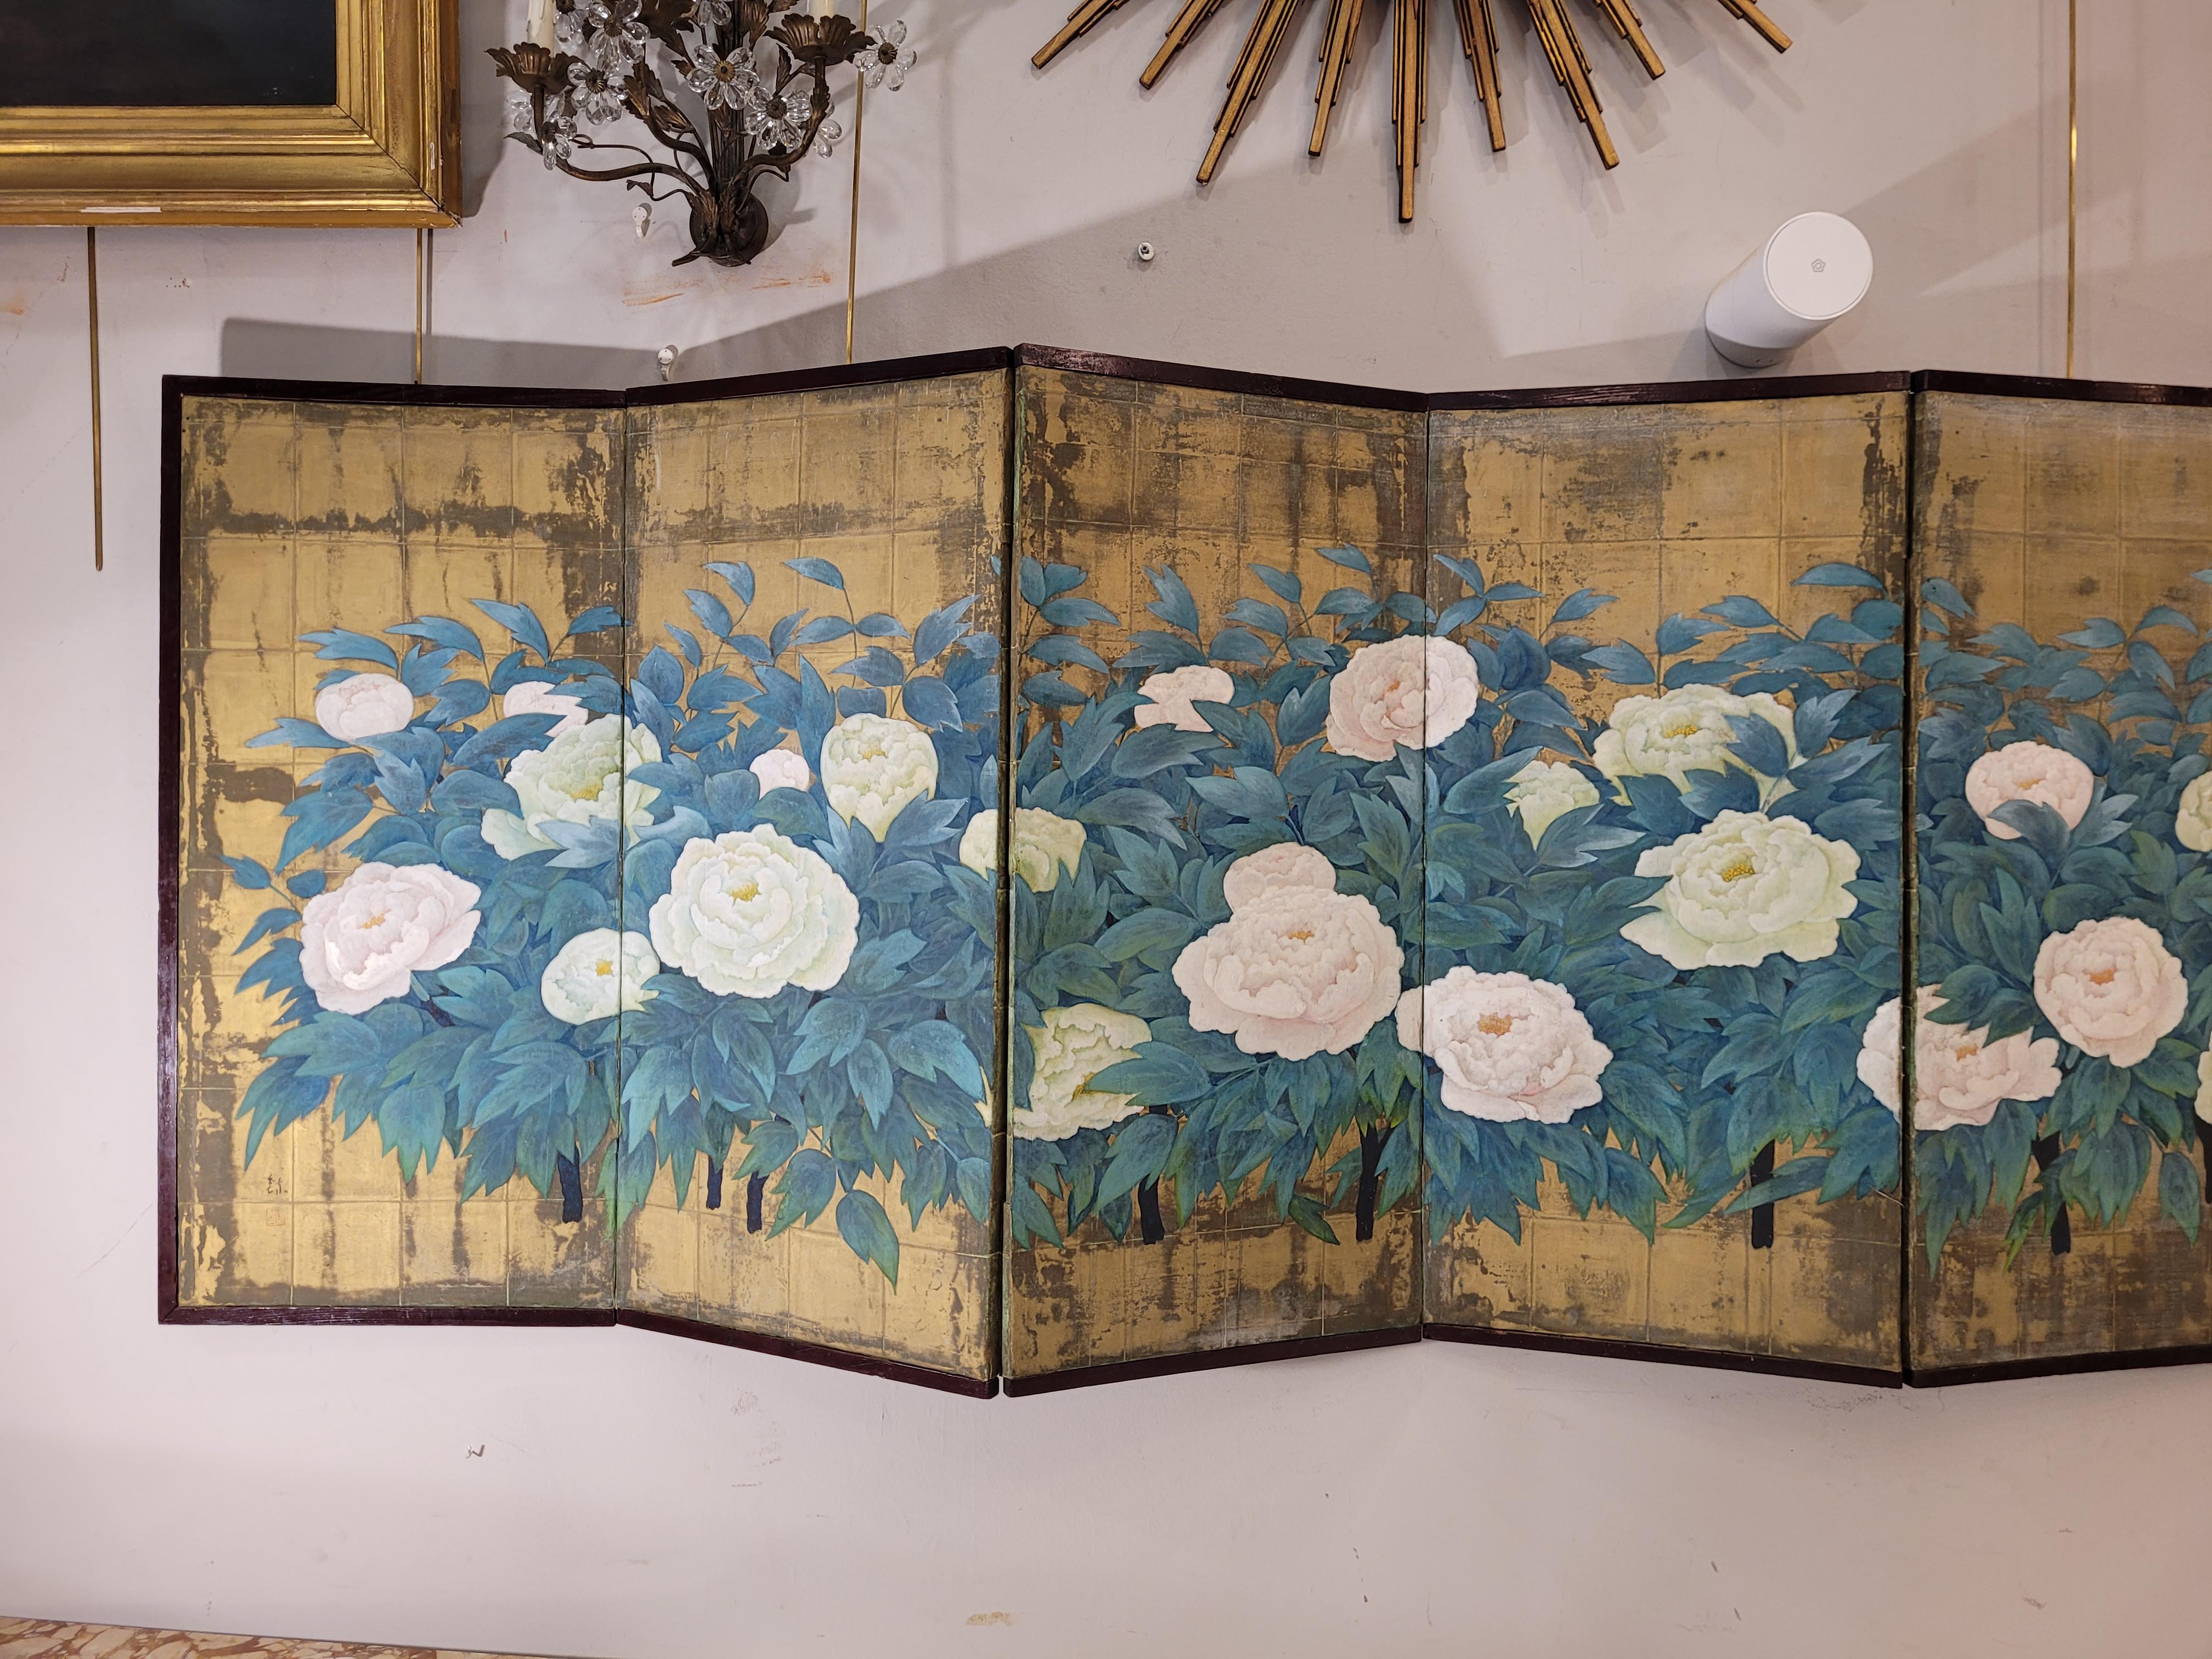 Byobu, Folding screen, Room divider 屏風 (Byôbu) - Lacquered wood, Paper, Gold leaf - Flowers, Peonies 牡丹 (botan) - Signed by ‘Ren Kaneda’ 金田錬 - Charming low 6-panel folding screen with a painting of a cluster of peonies. - Japan - ‘Shôwa 59’ 昭和五十九年,